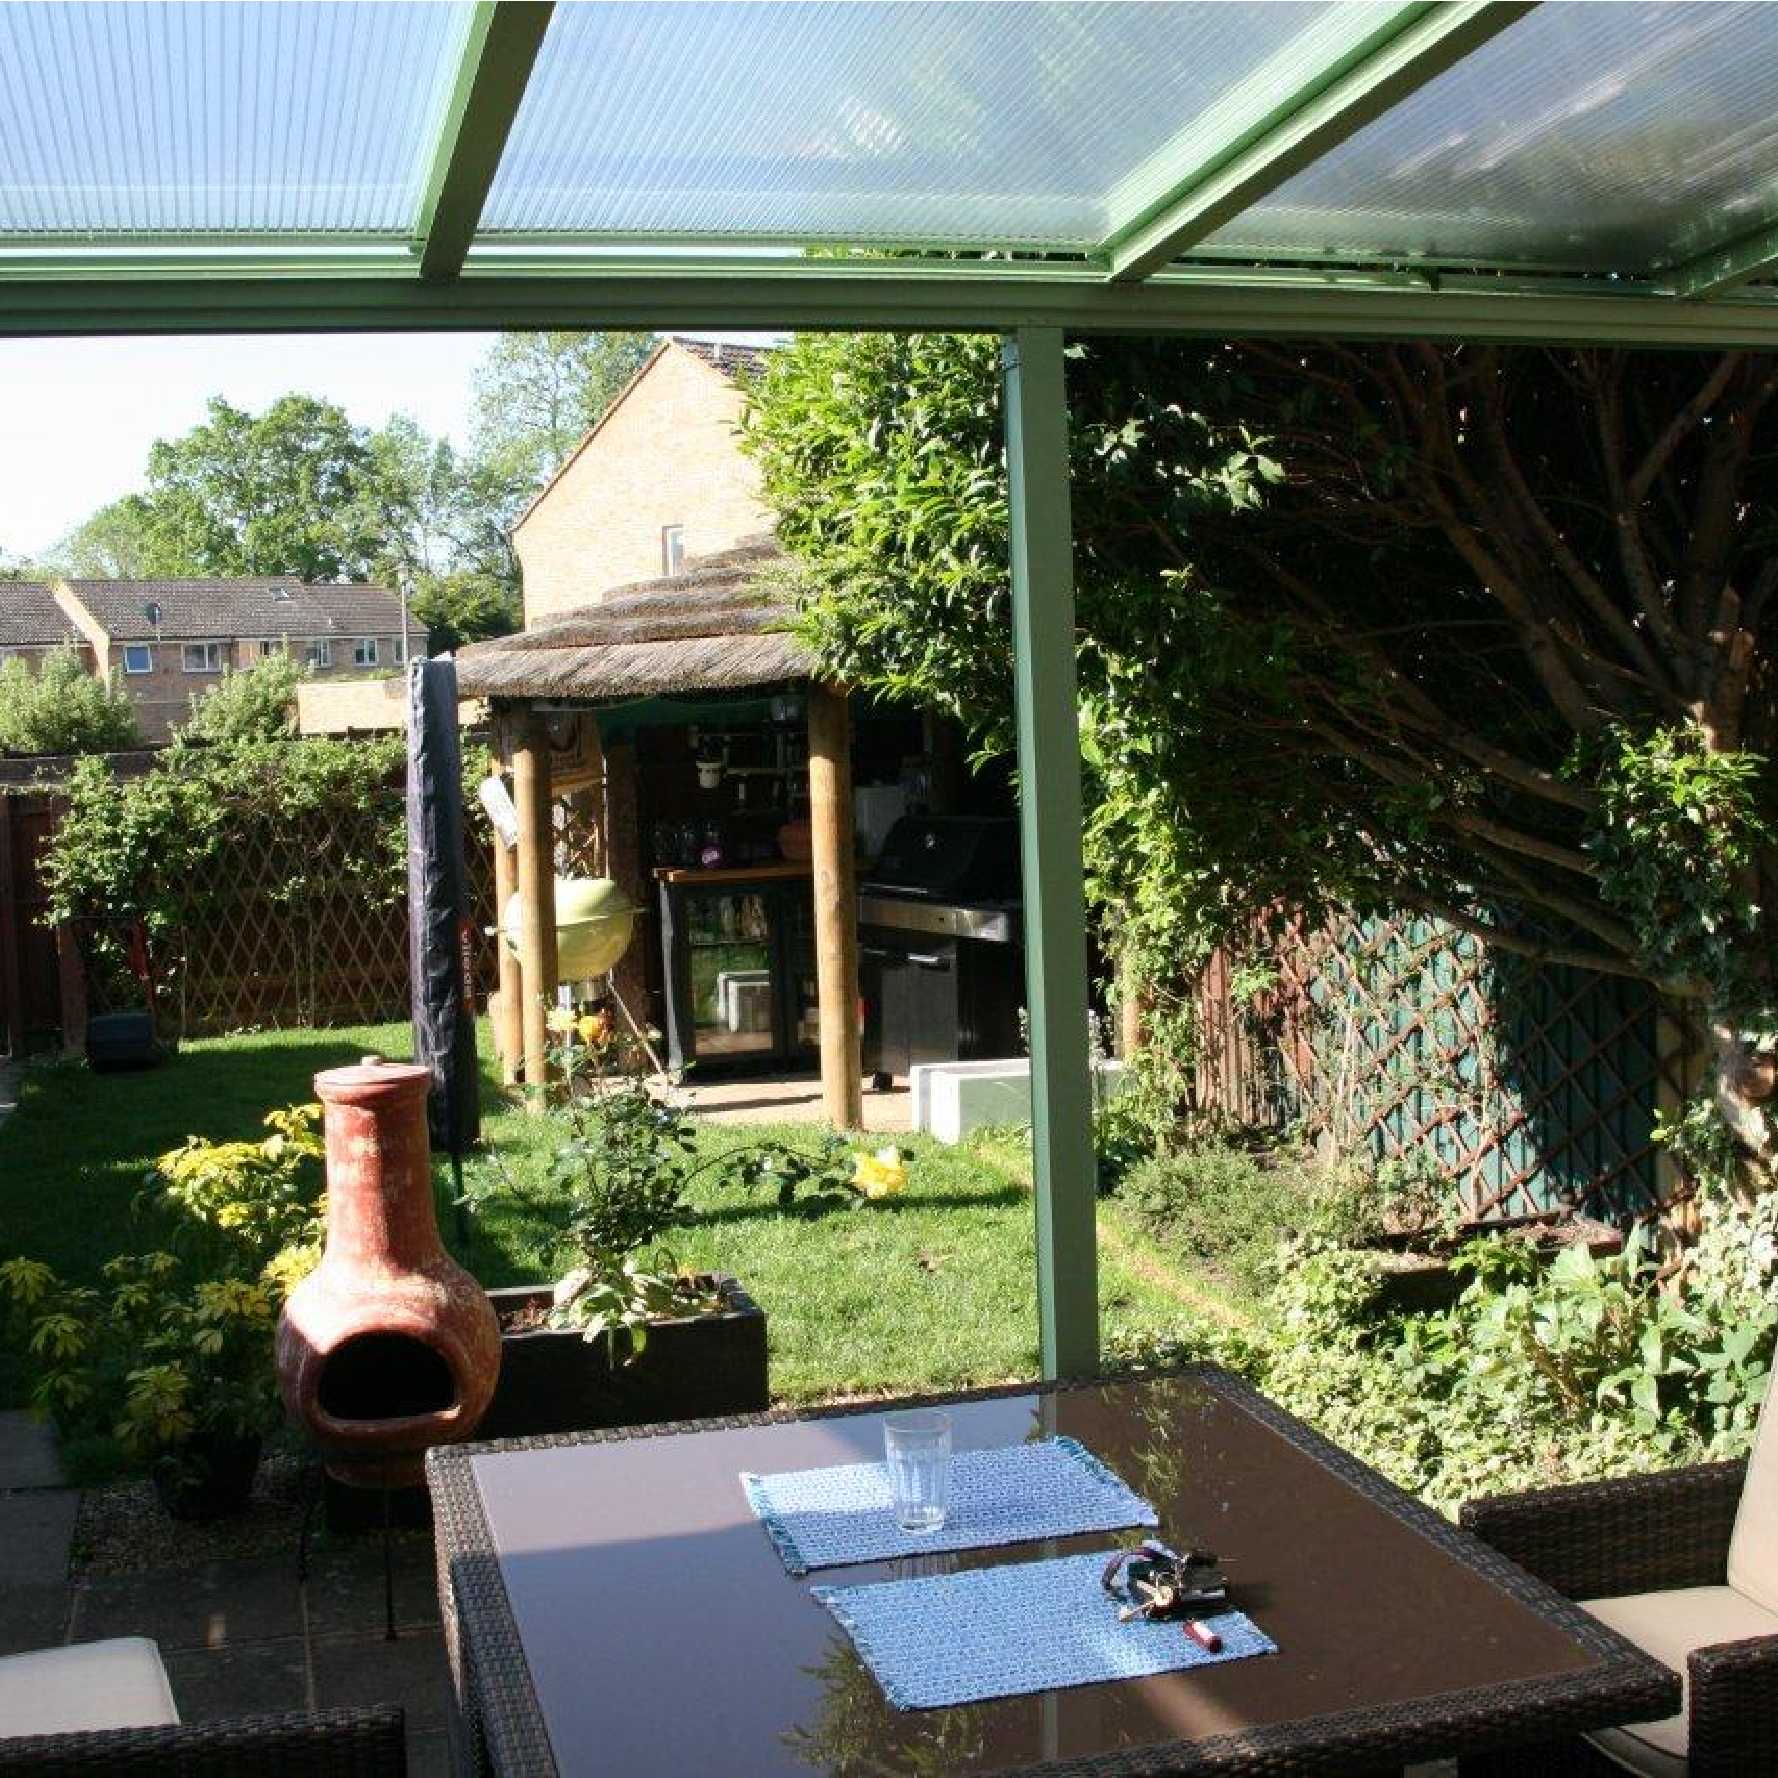 Affordable Omega Smart Lean-To Canopy, White with 16mm Polycarbonate Glazing - 11.6m (W) x 1.5m (P), (5) Supporting Posts